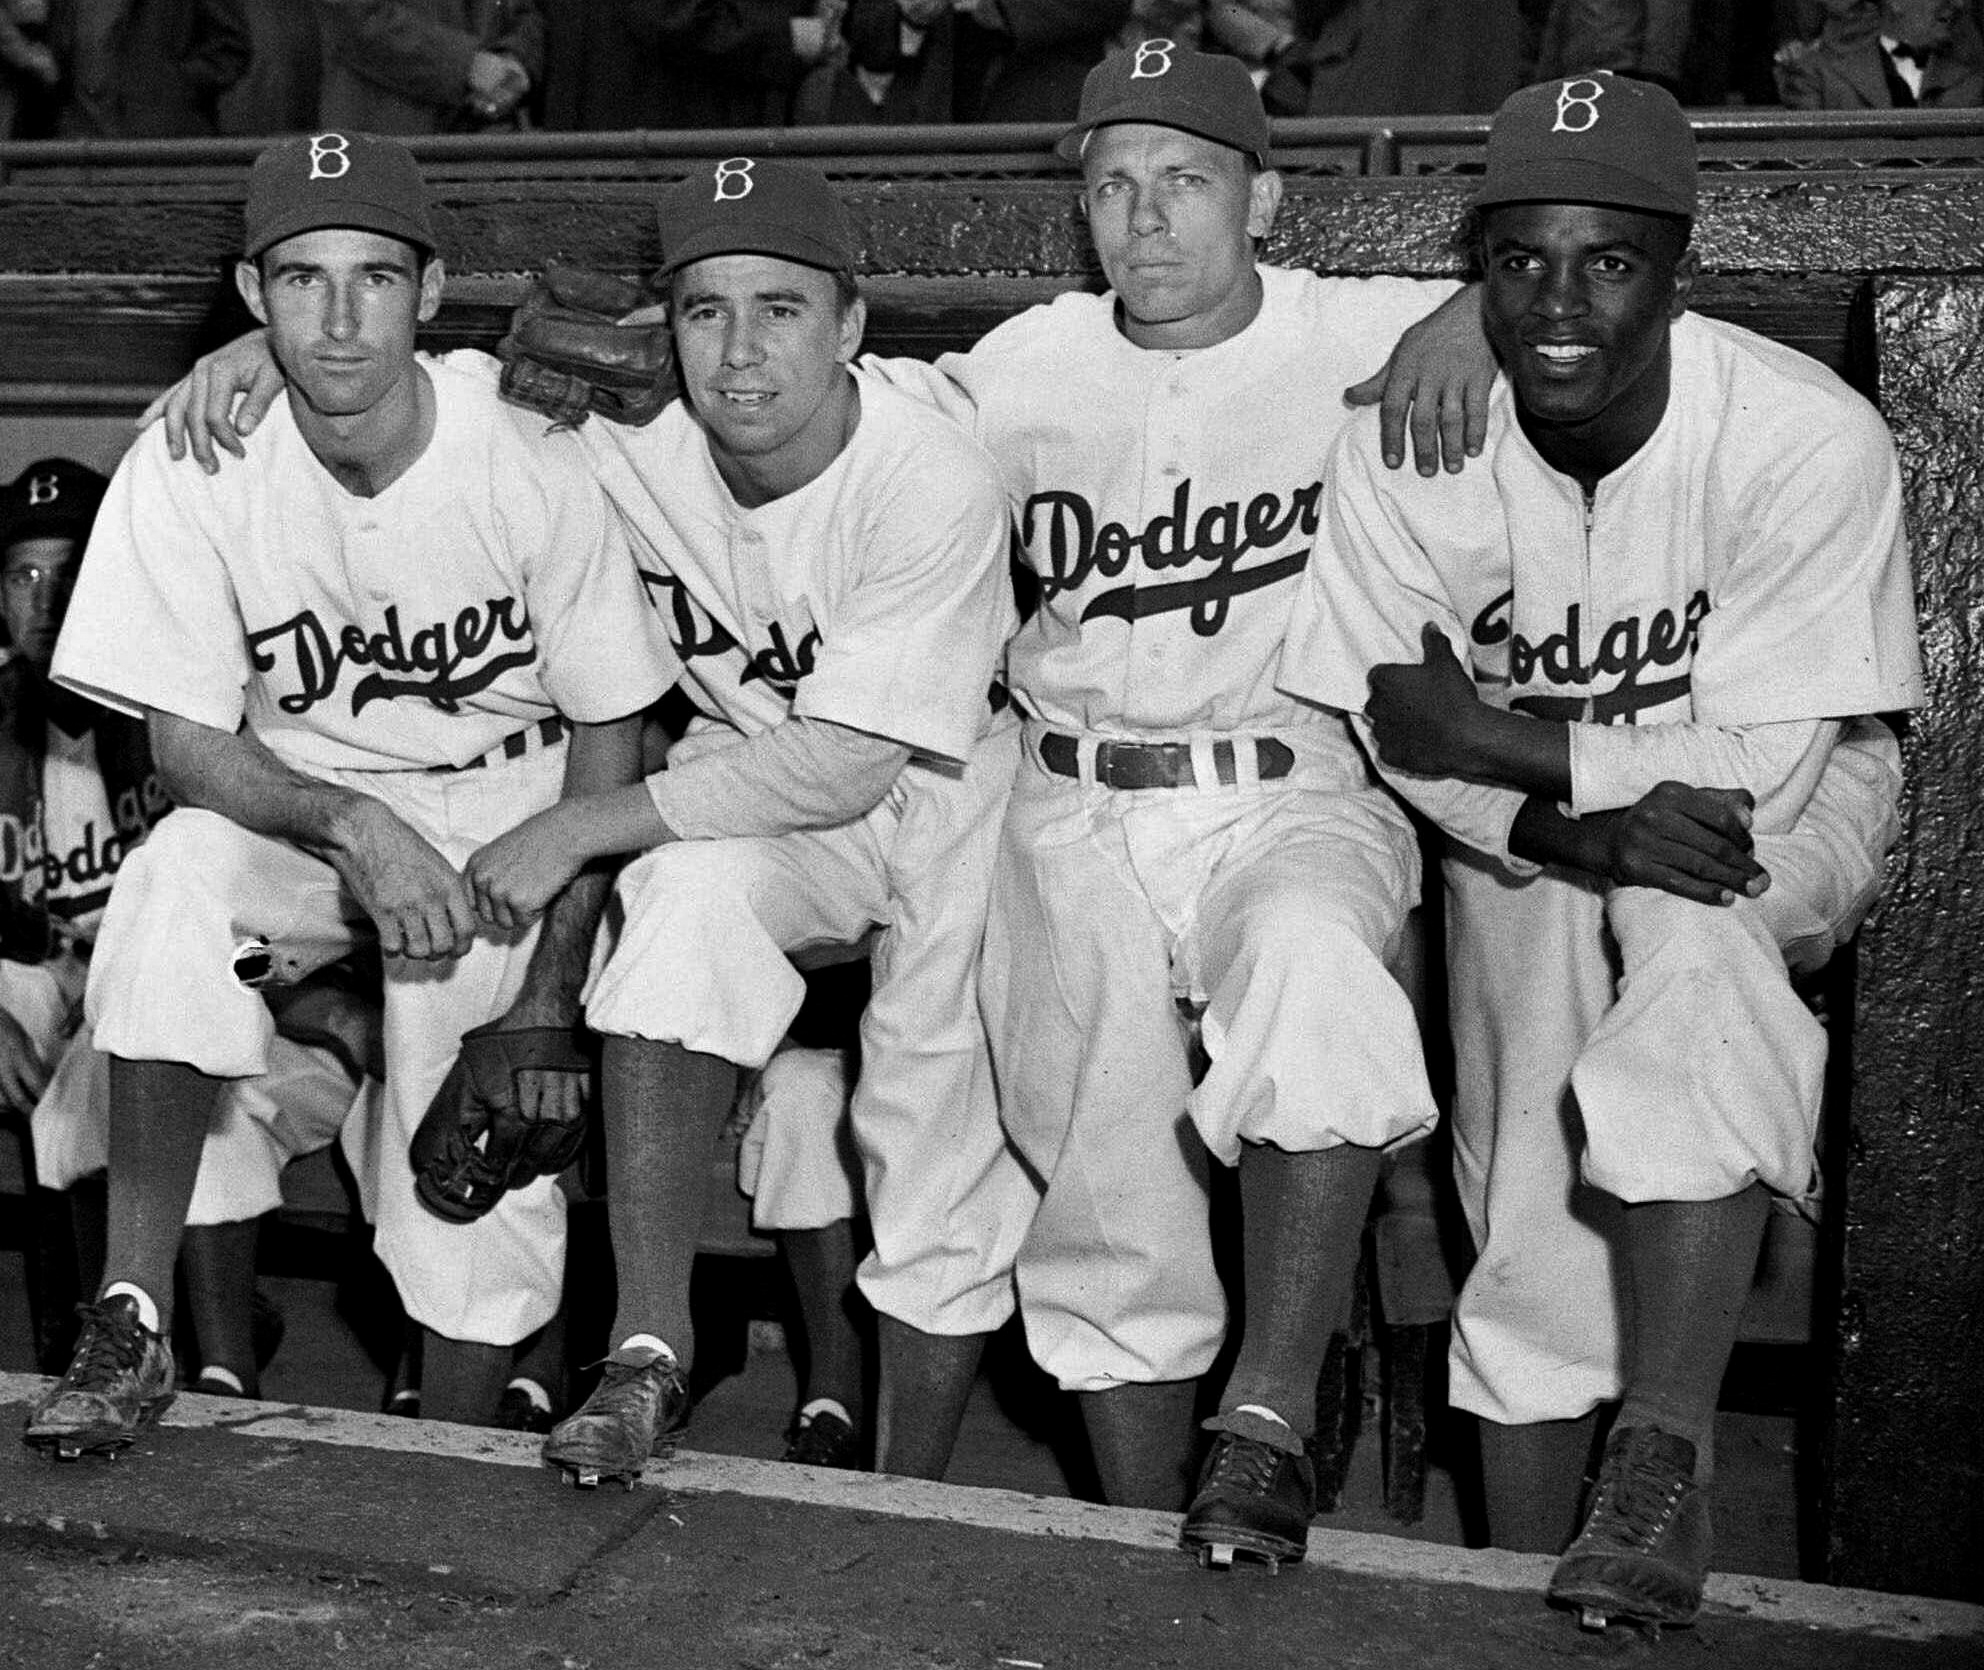 jackie robinson in the dugout with other players